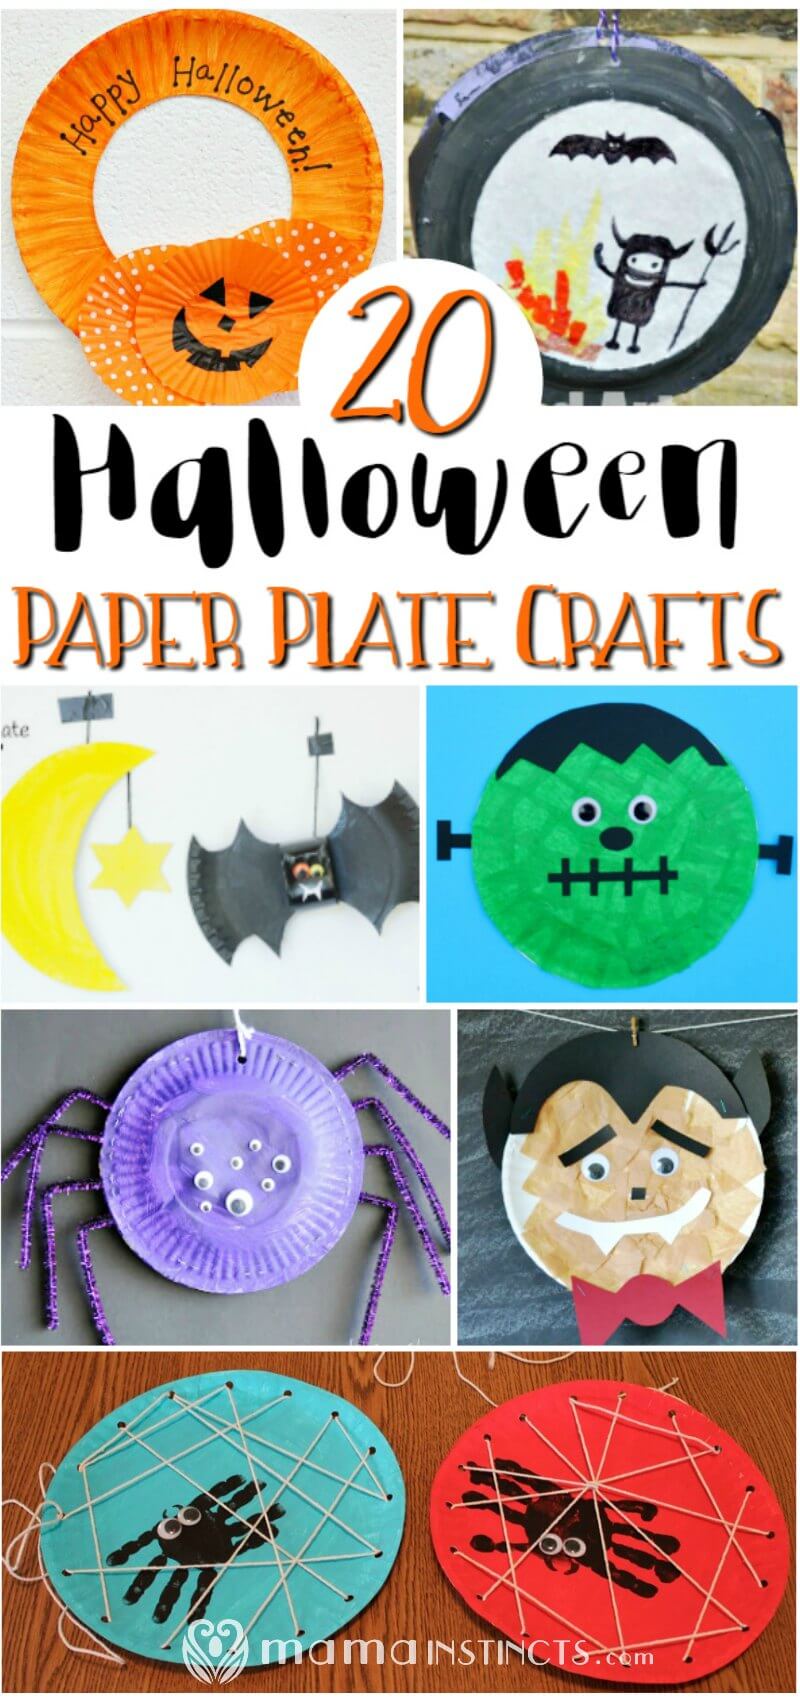 Halloween is the perfect time to make crafts and even more so when they're paper plate crafts. Make these halloween paper plate crafts with your kids today or save this pin for later.